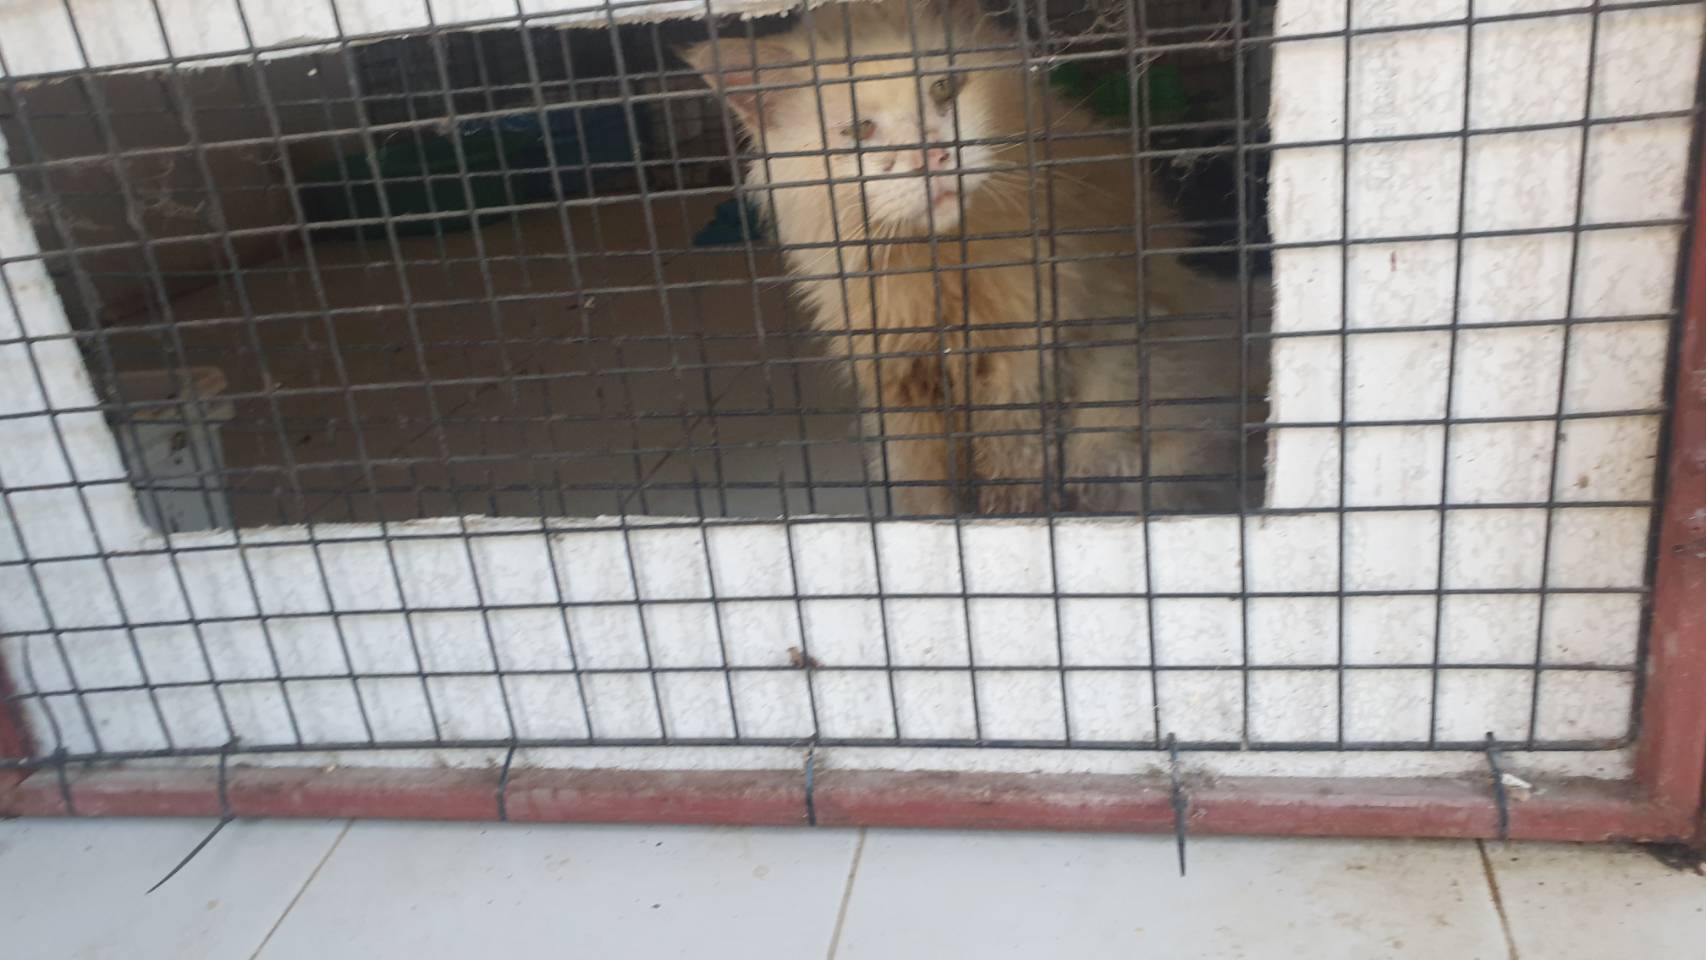 The rescue of the 17 Persian cats